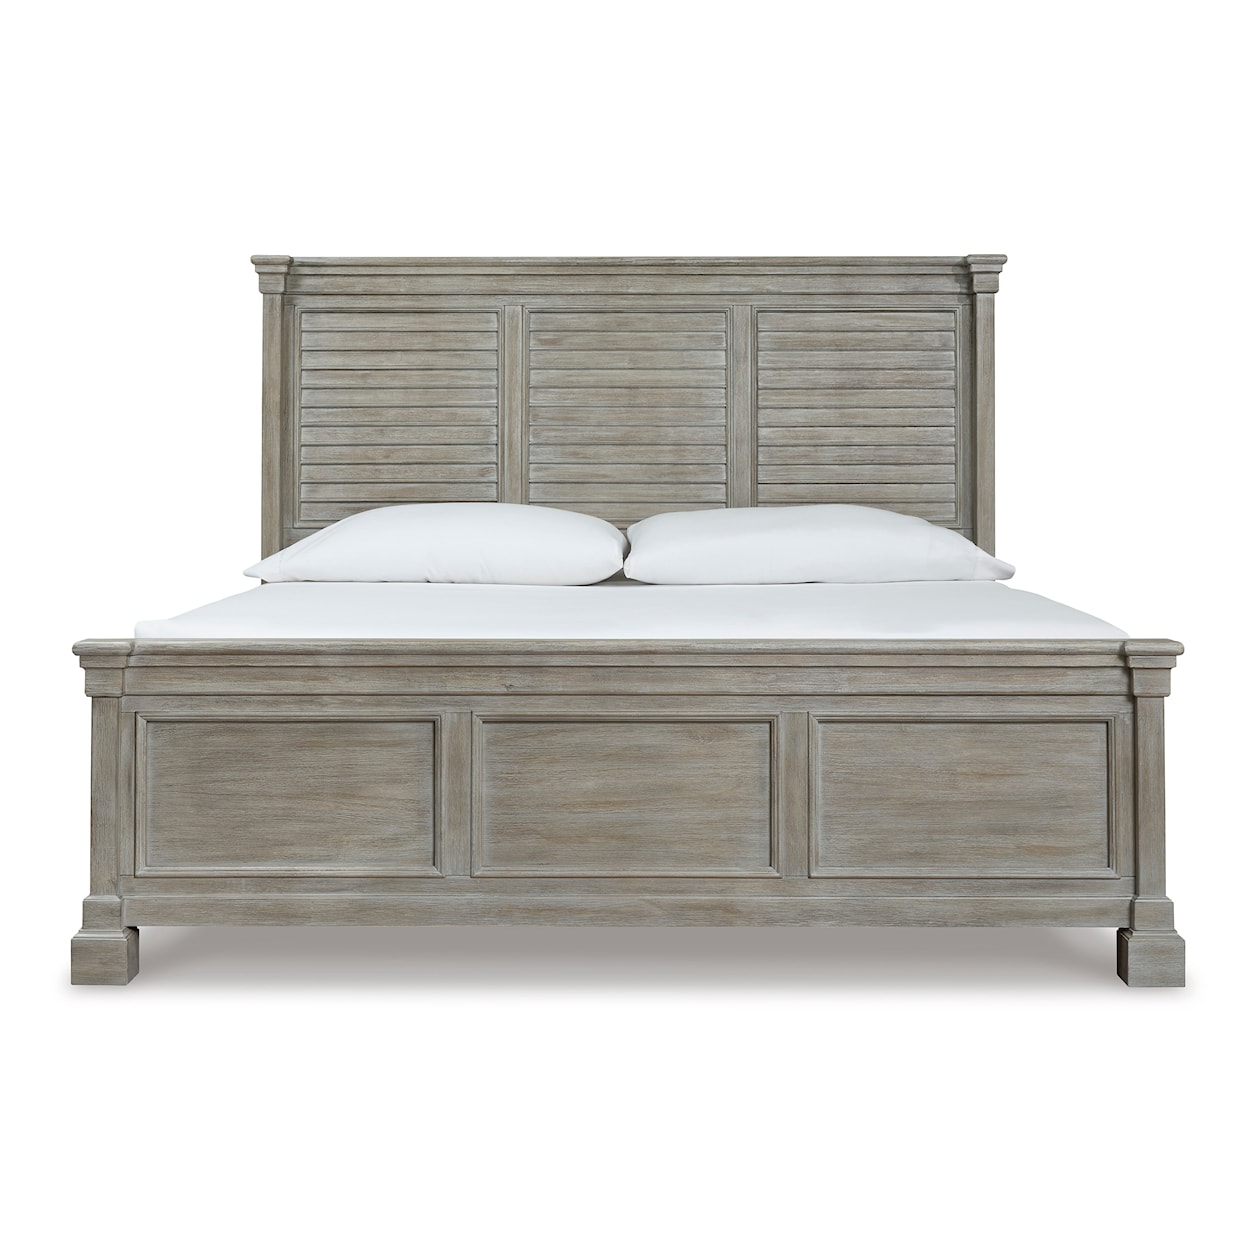 Signature Moreshire Queen Panel Bed